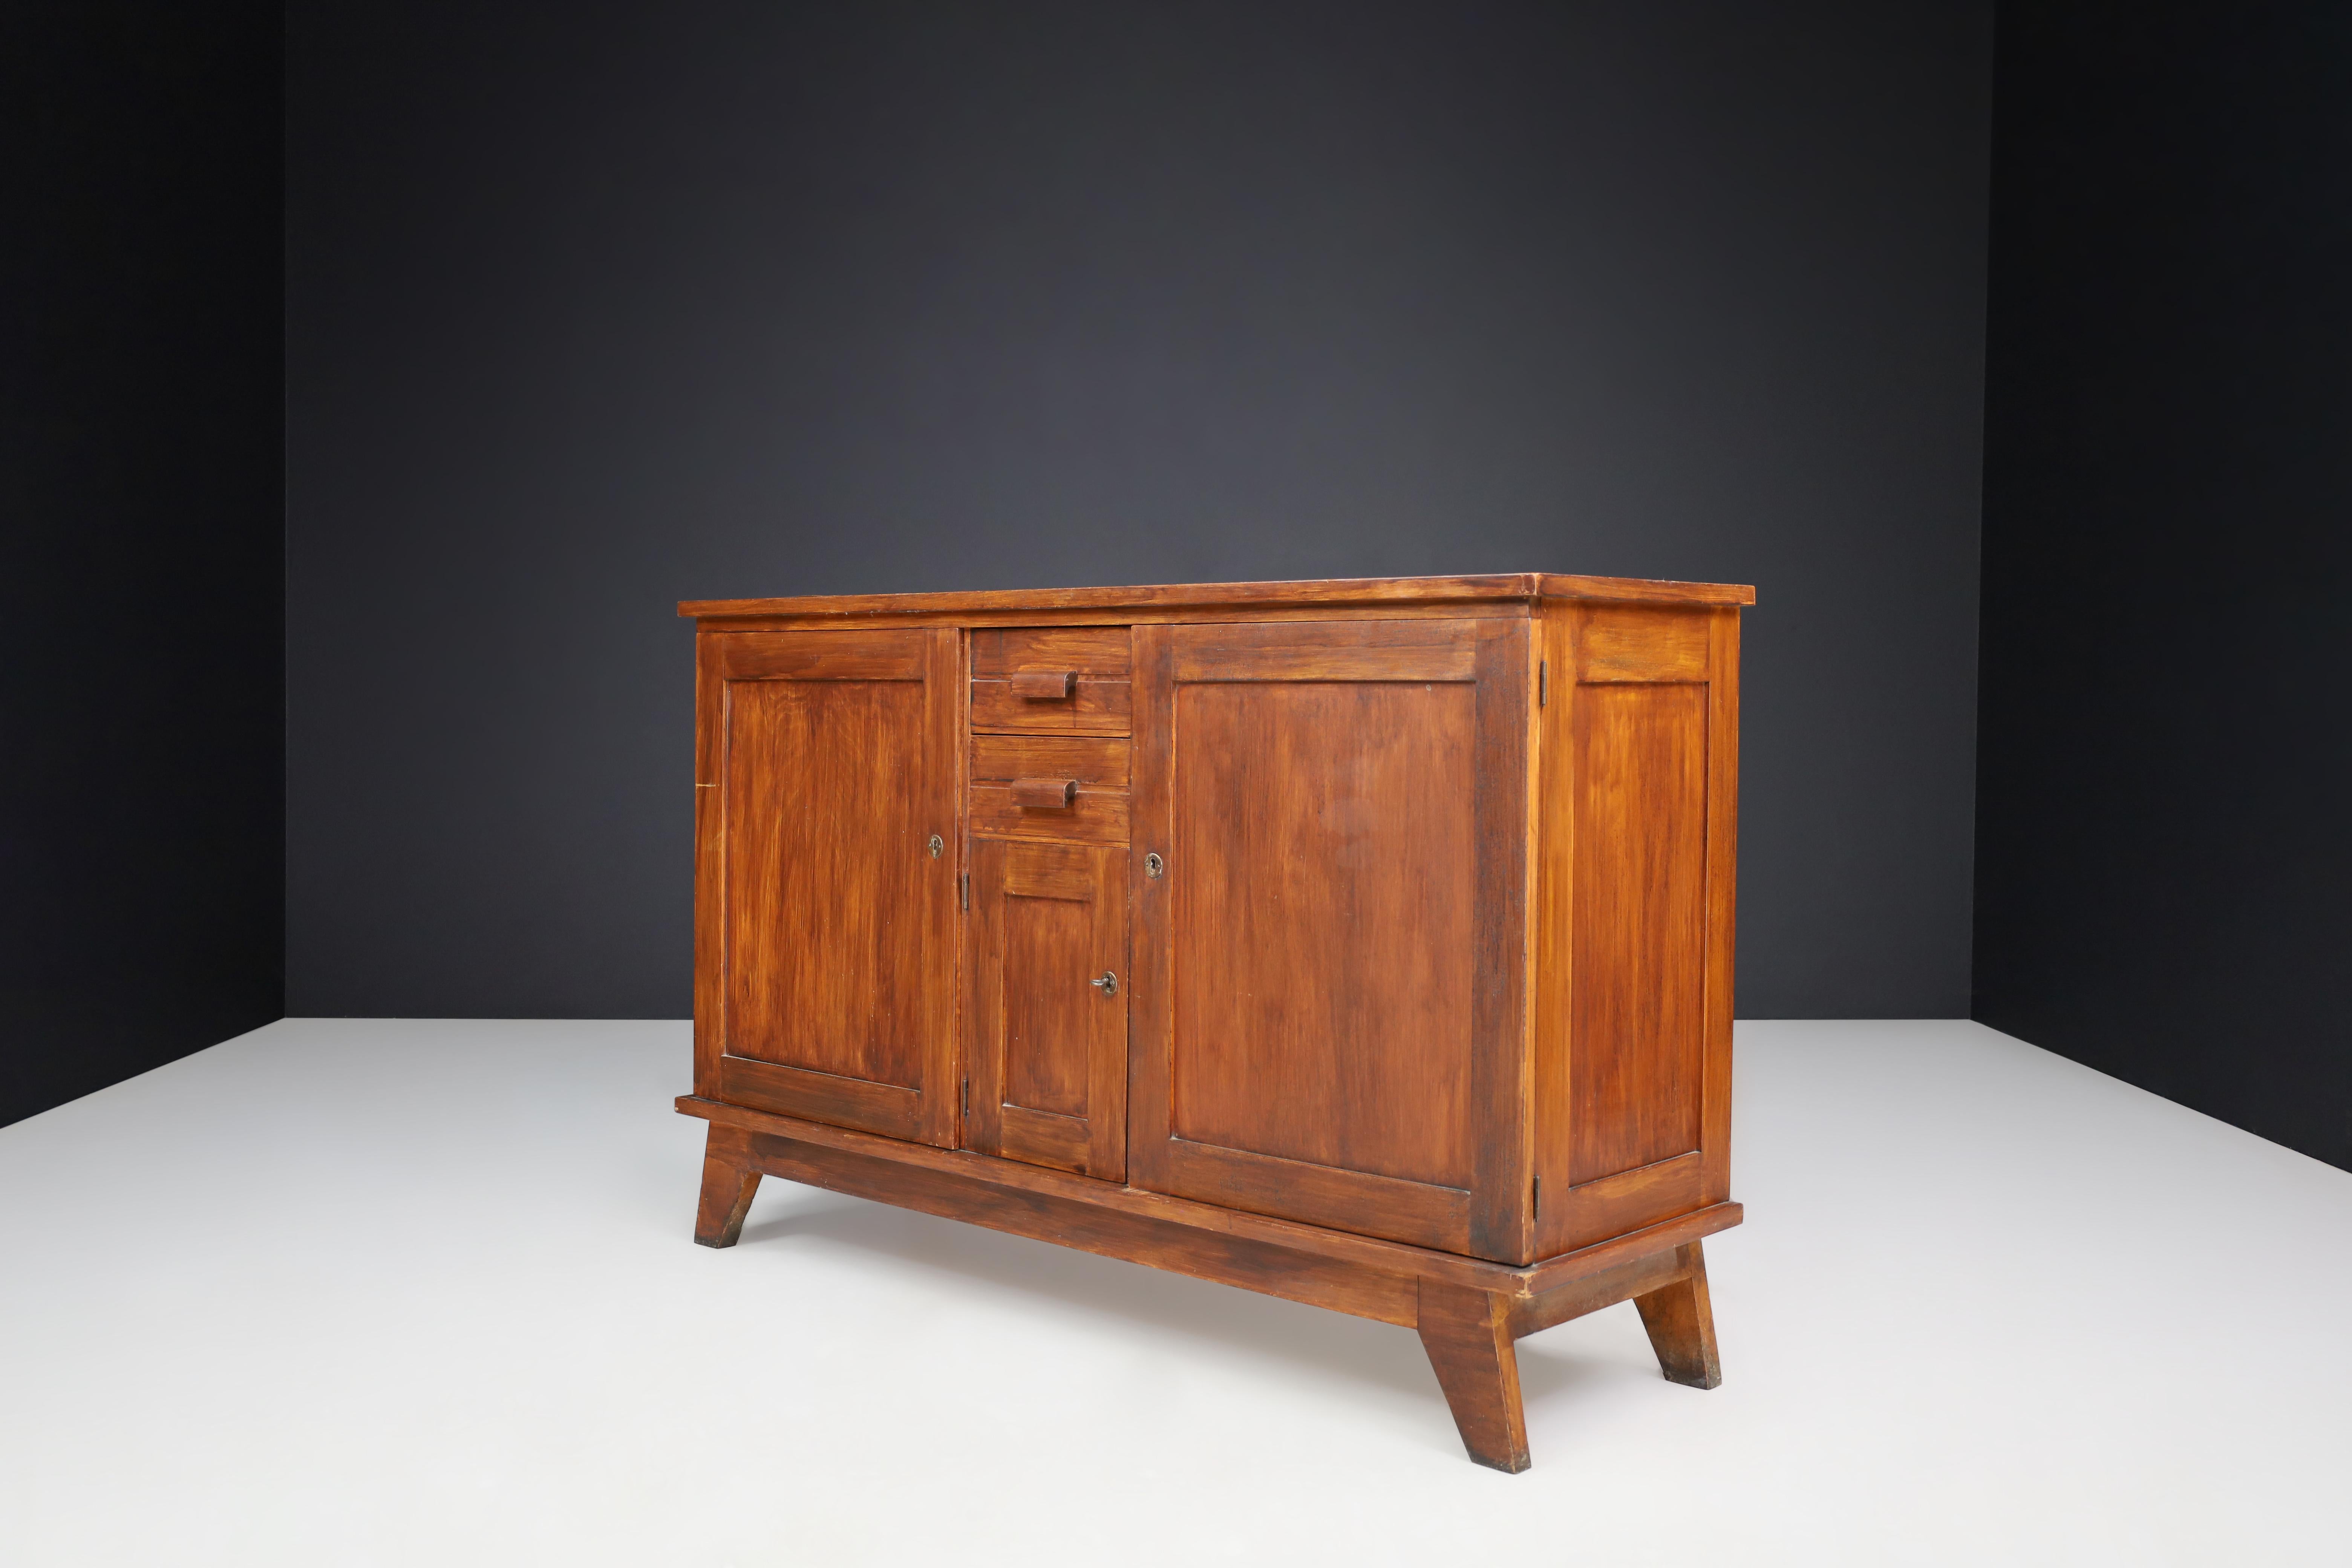 Original René Gabriel Patinated Oak Sideboard, France, 1940s

This is a midcentury sideboard made of patinated French oak and designed by René Gabriel in France during the 1940s. It was created as part of a collection of emergency furniture for